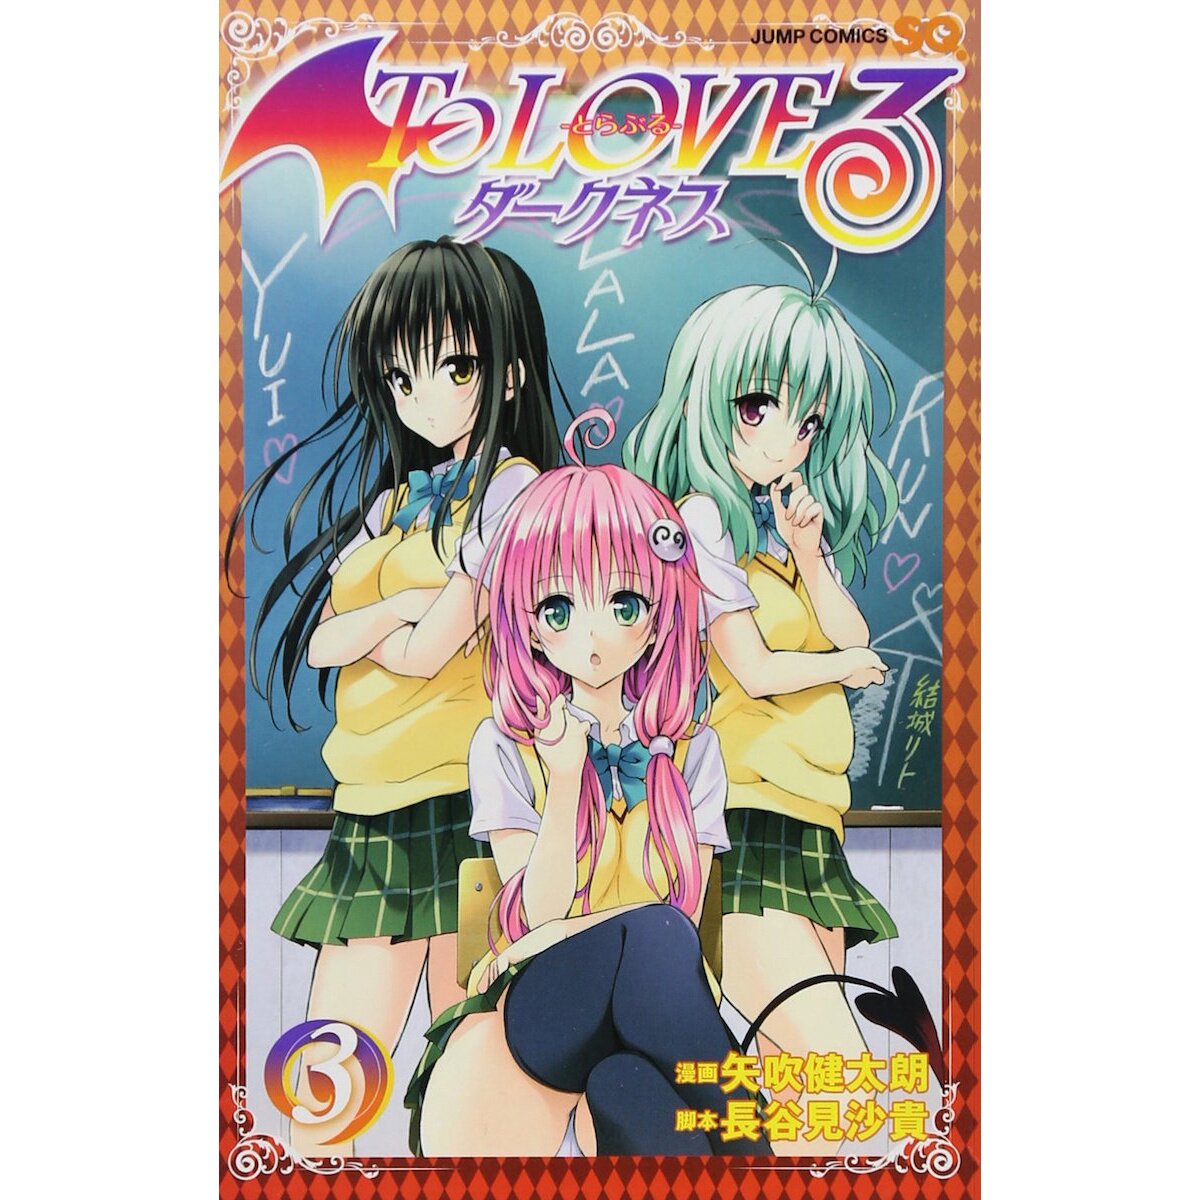 To Love Ru Darkness (Season 3) Complete Collection